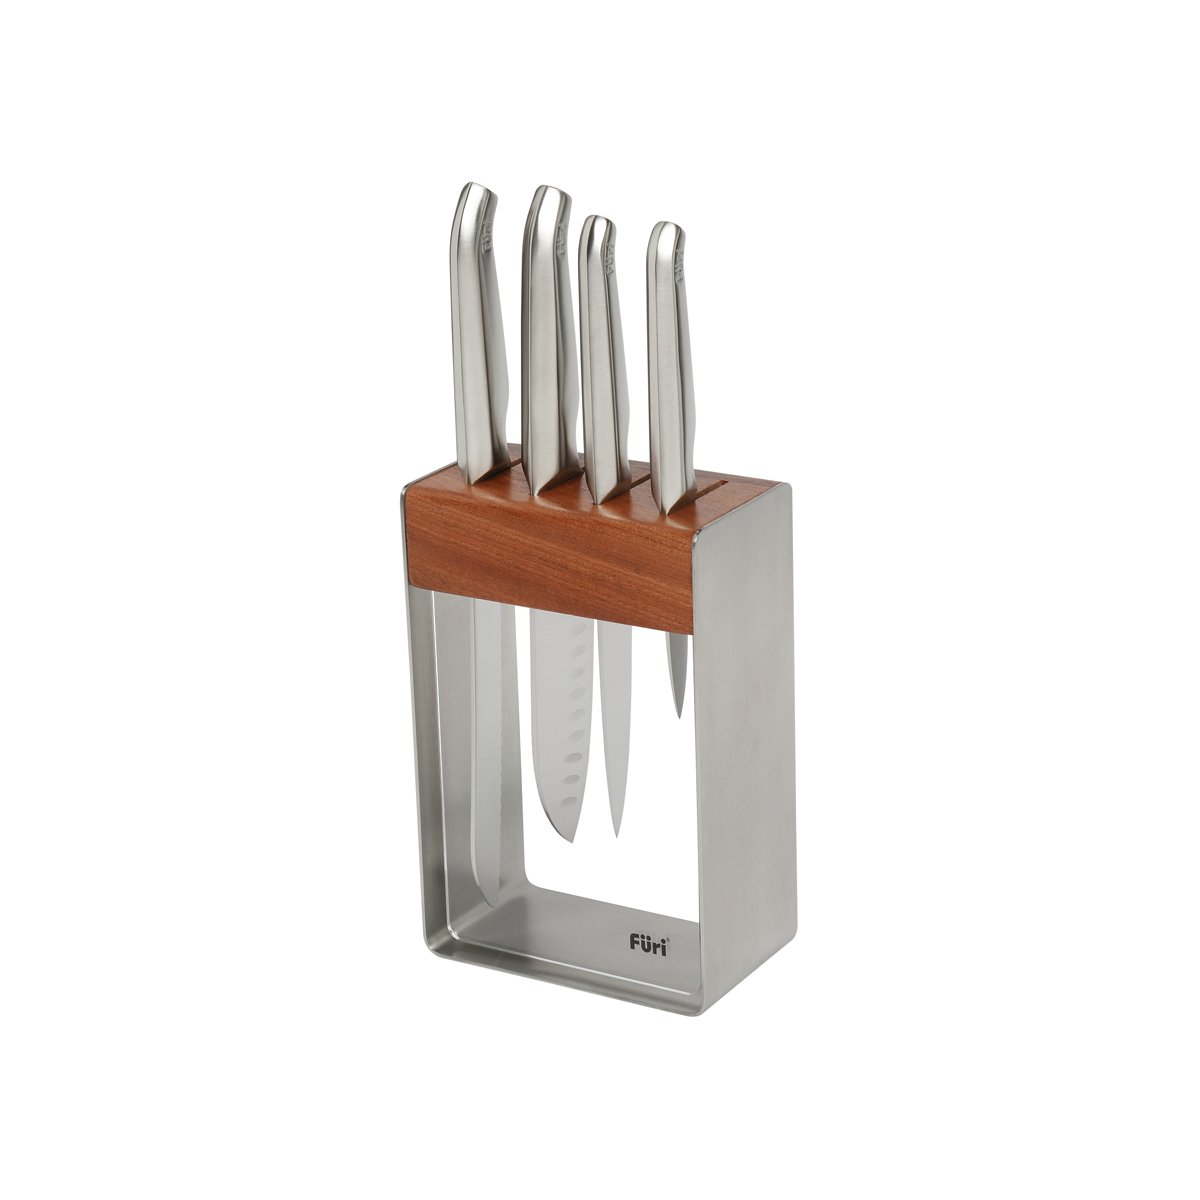 Furi Clean and Store Stainless Steel Knife Block Black Set 5pc